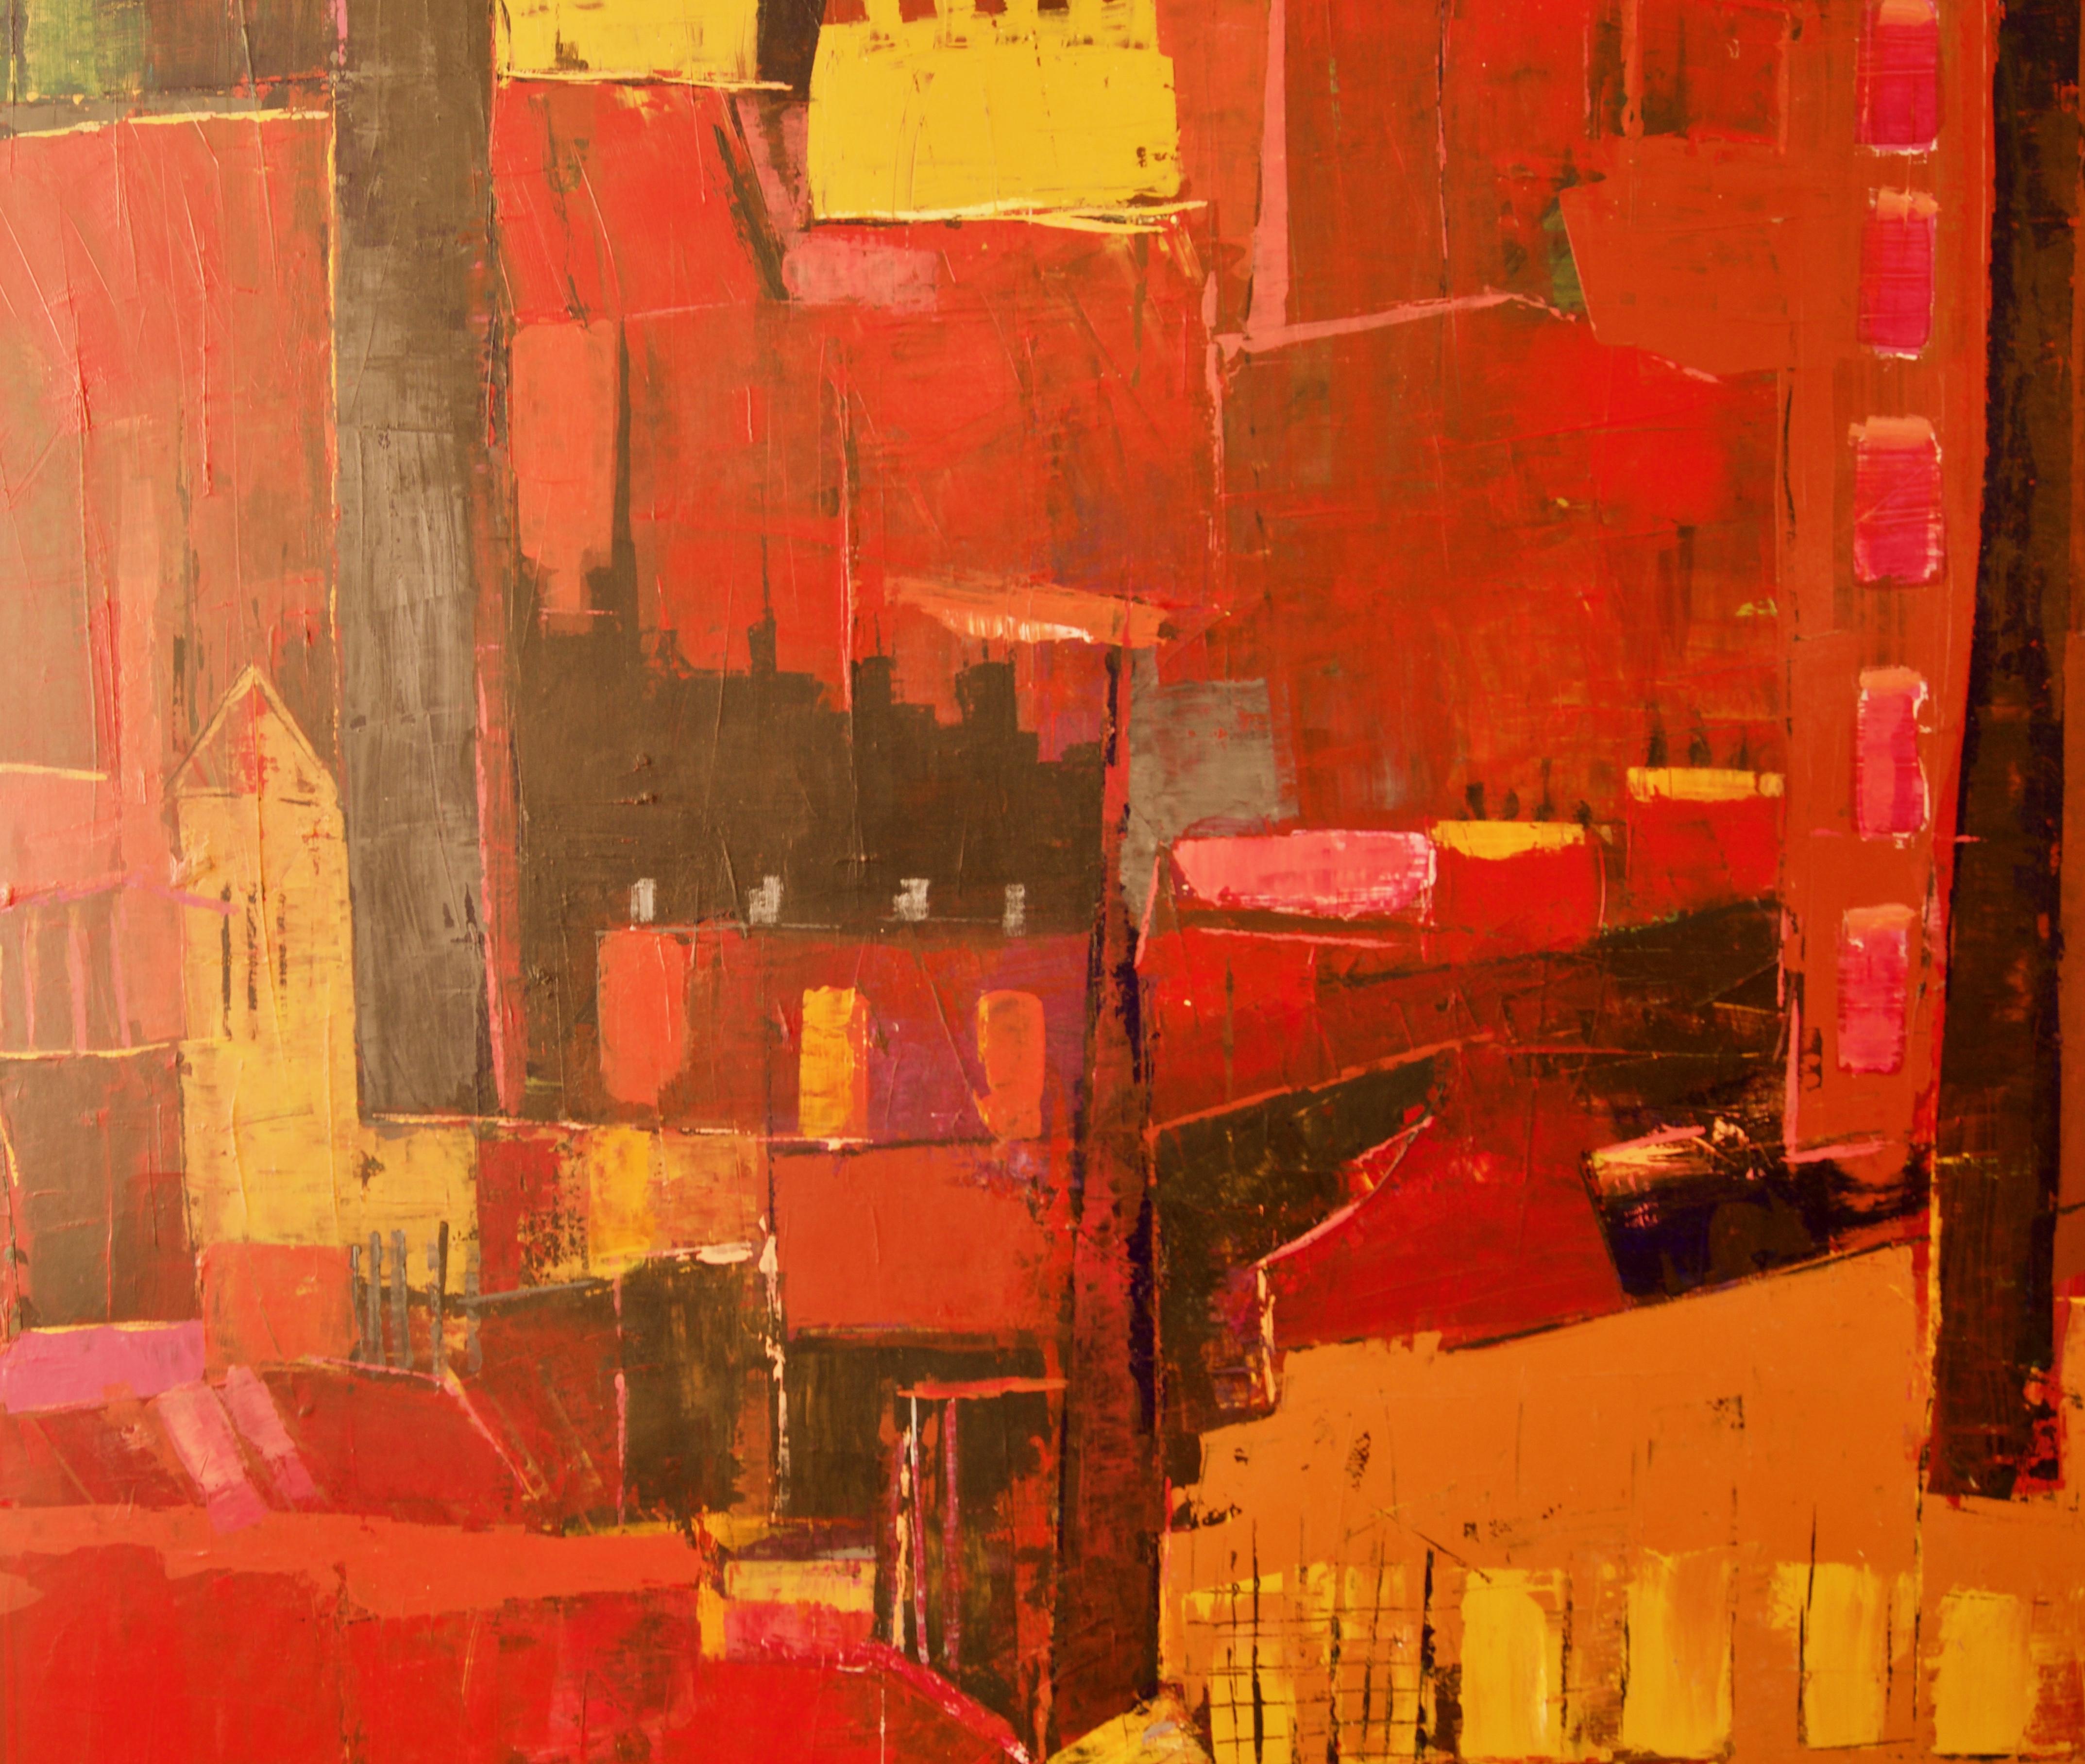 Abstract City Landscape - Late 20th Century Acrylic Painting by Amrik Varkalis

Amrik Varkalis trained at The Manchester School of Art in the 1970's. She employs her complete understanding of colour and form, to create lush abstract landscapes and